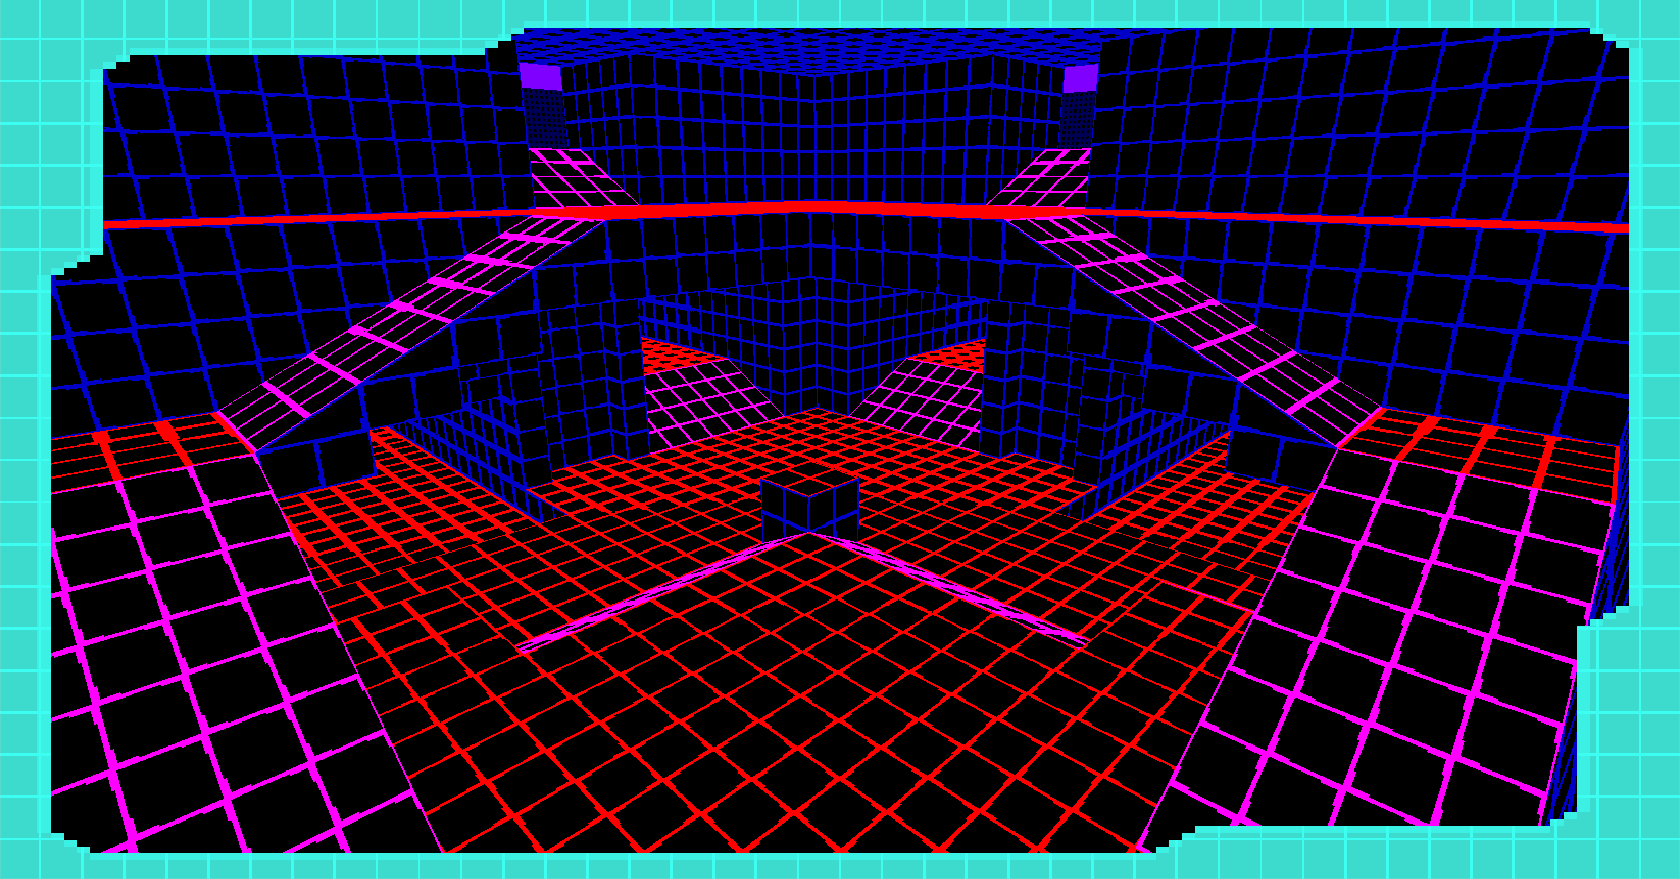 An image of the tunnel madness map